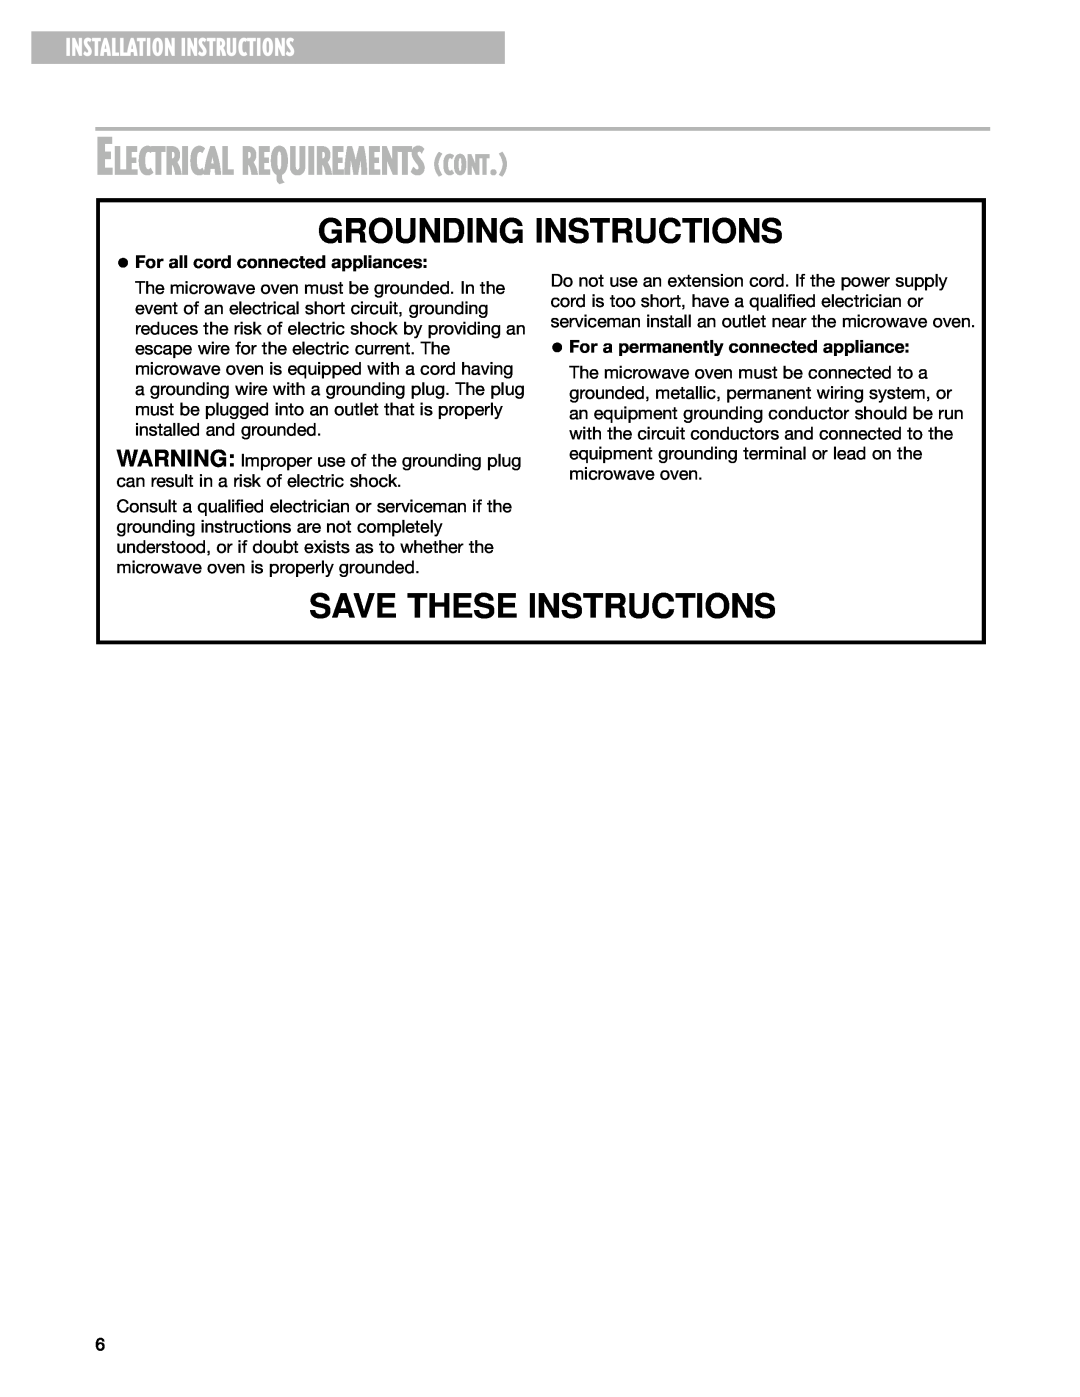 Whirlpool MT4110SK Electrical Requirements Cont, Grounding Instructions, Installation Instructions 